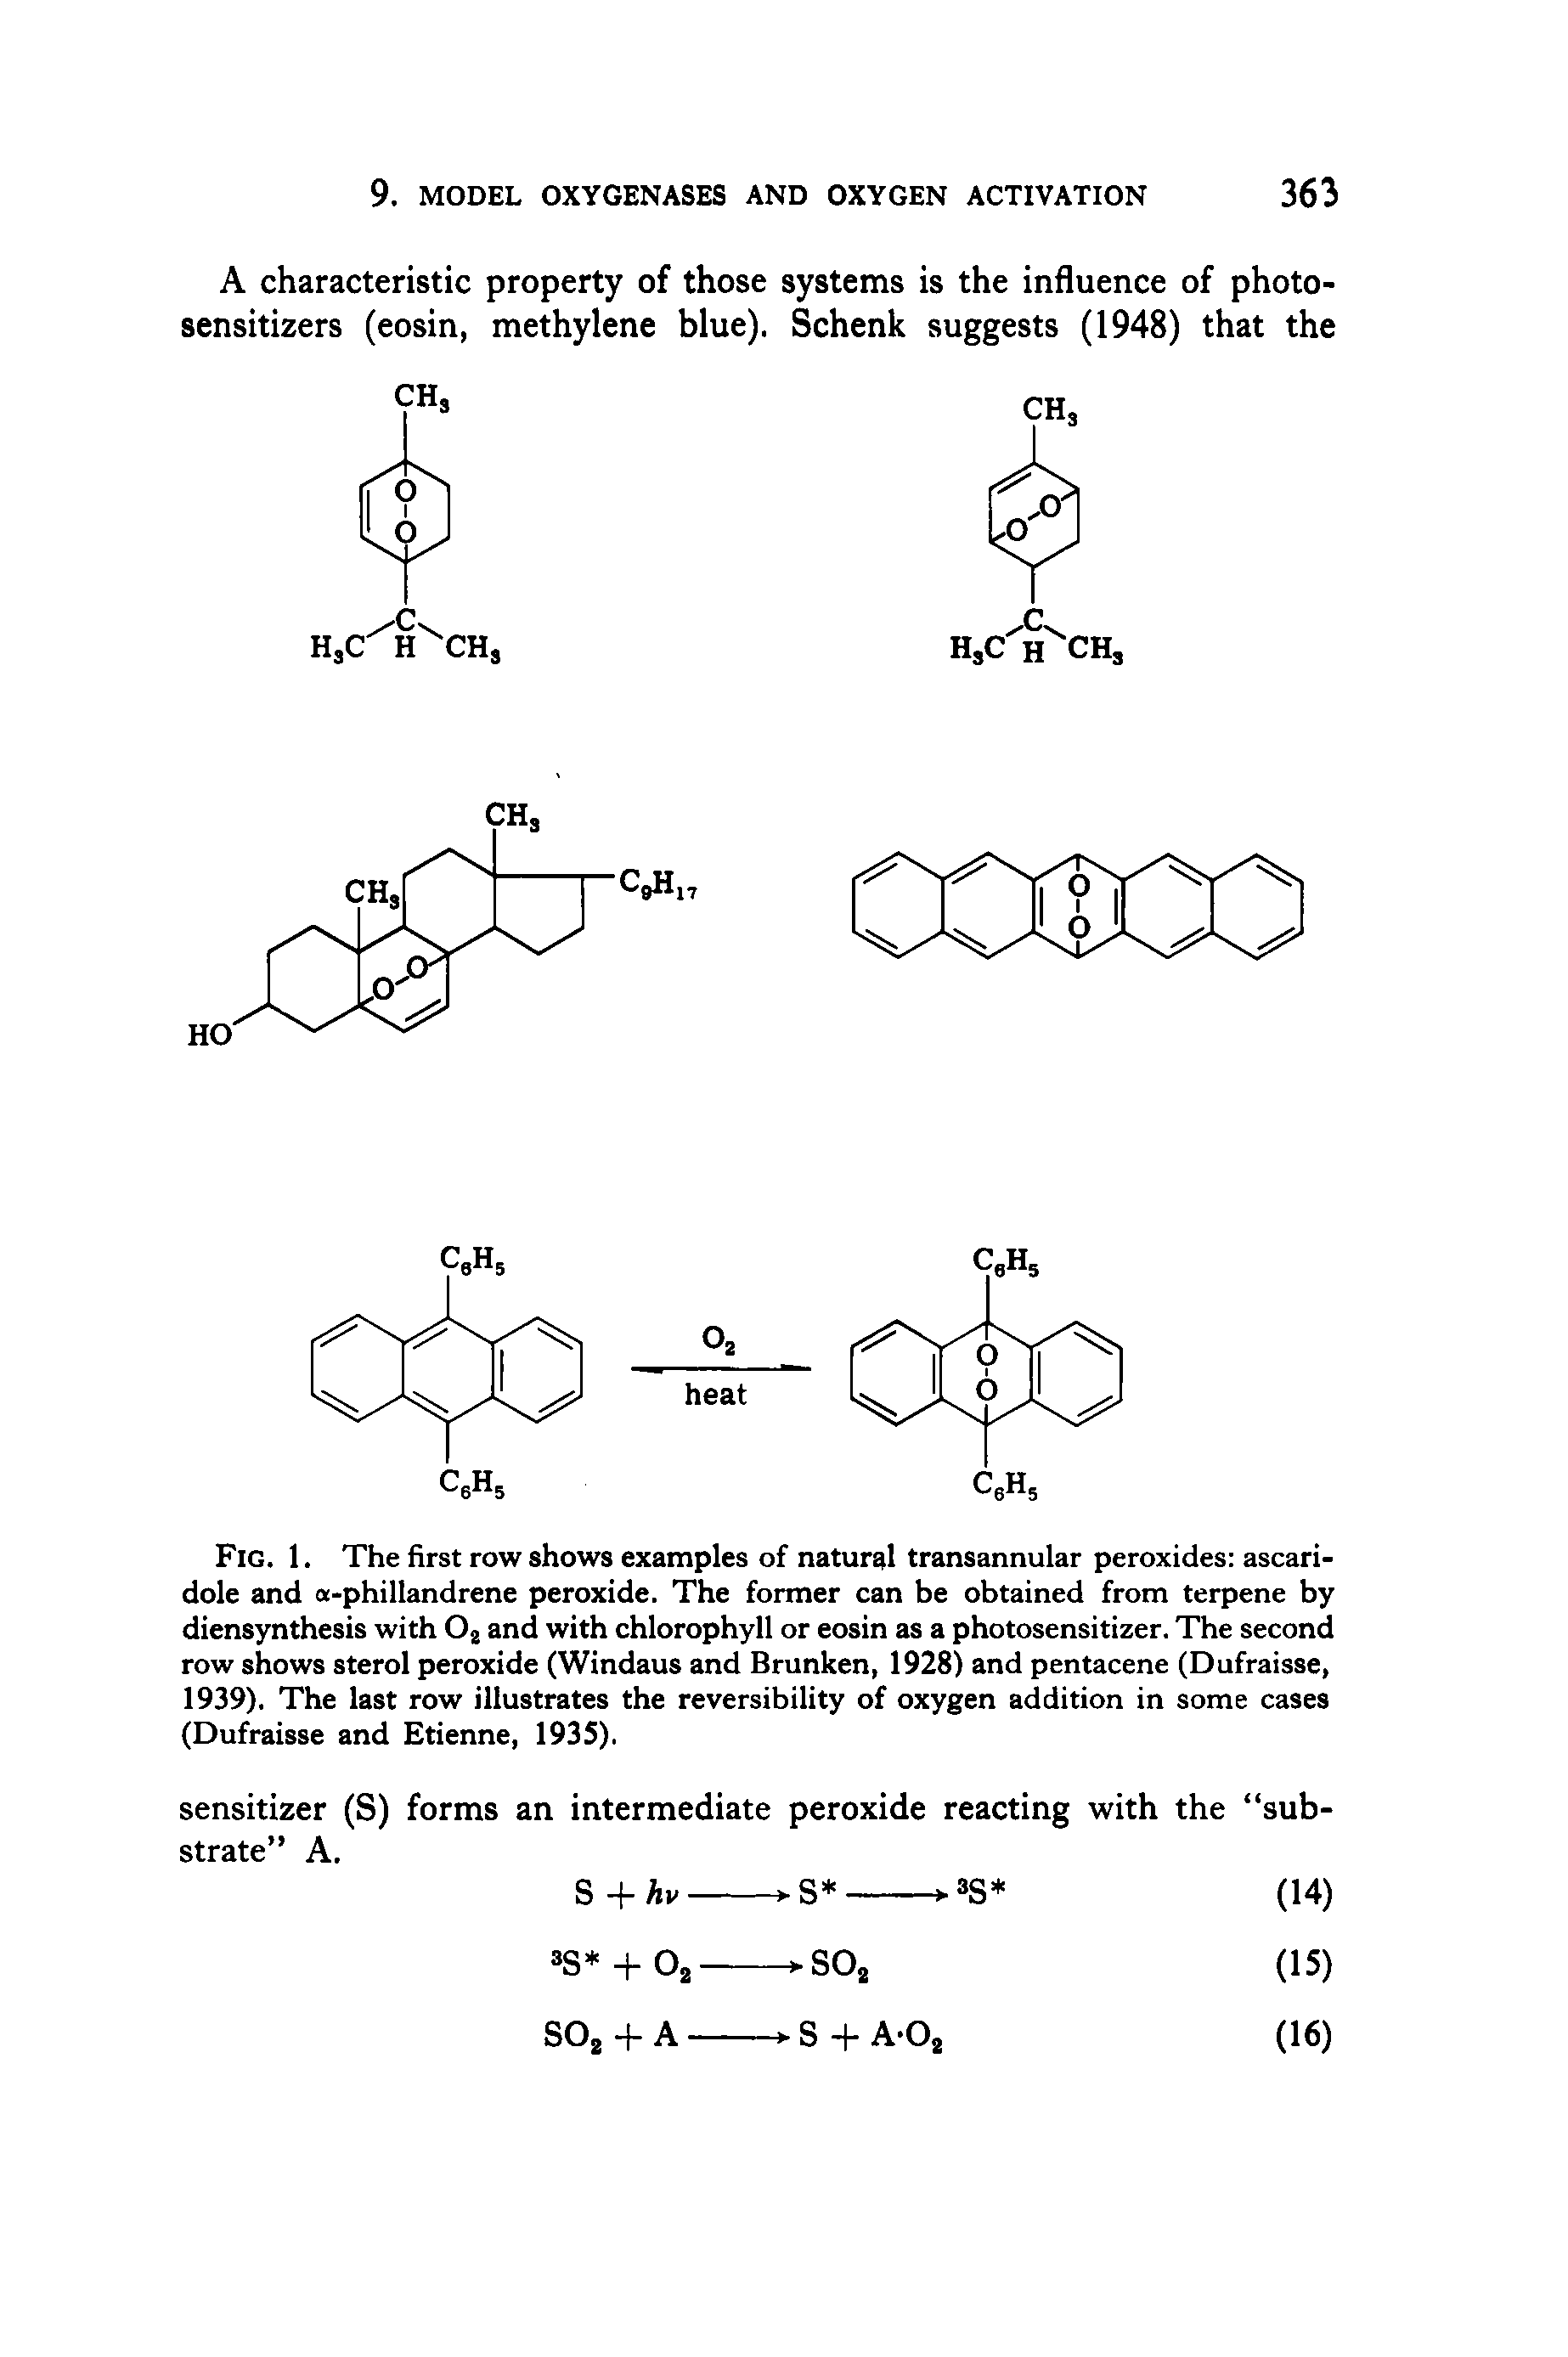 Fig. 1. The first row shows examples of natural transannular peroxides ascari-dole and a-phillandrene peroxide. The former can be obtained from terpene by diensynthesis with Oj and with chlorophyll or eosin as a photosensitizer. The second row shows sterol peroxide (Windaus and Brunken, 1928) and pentacene (Dufraisse, 1939). The last row illustrates the reversibility of oxygen addition in some cases (Dufraisse and Etienne, 193S).